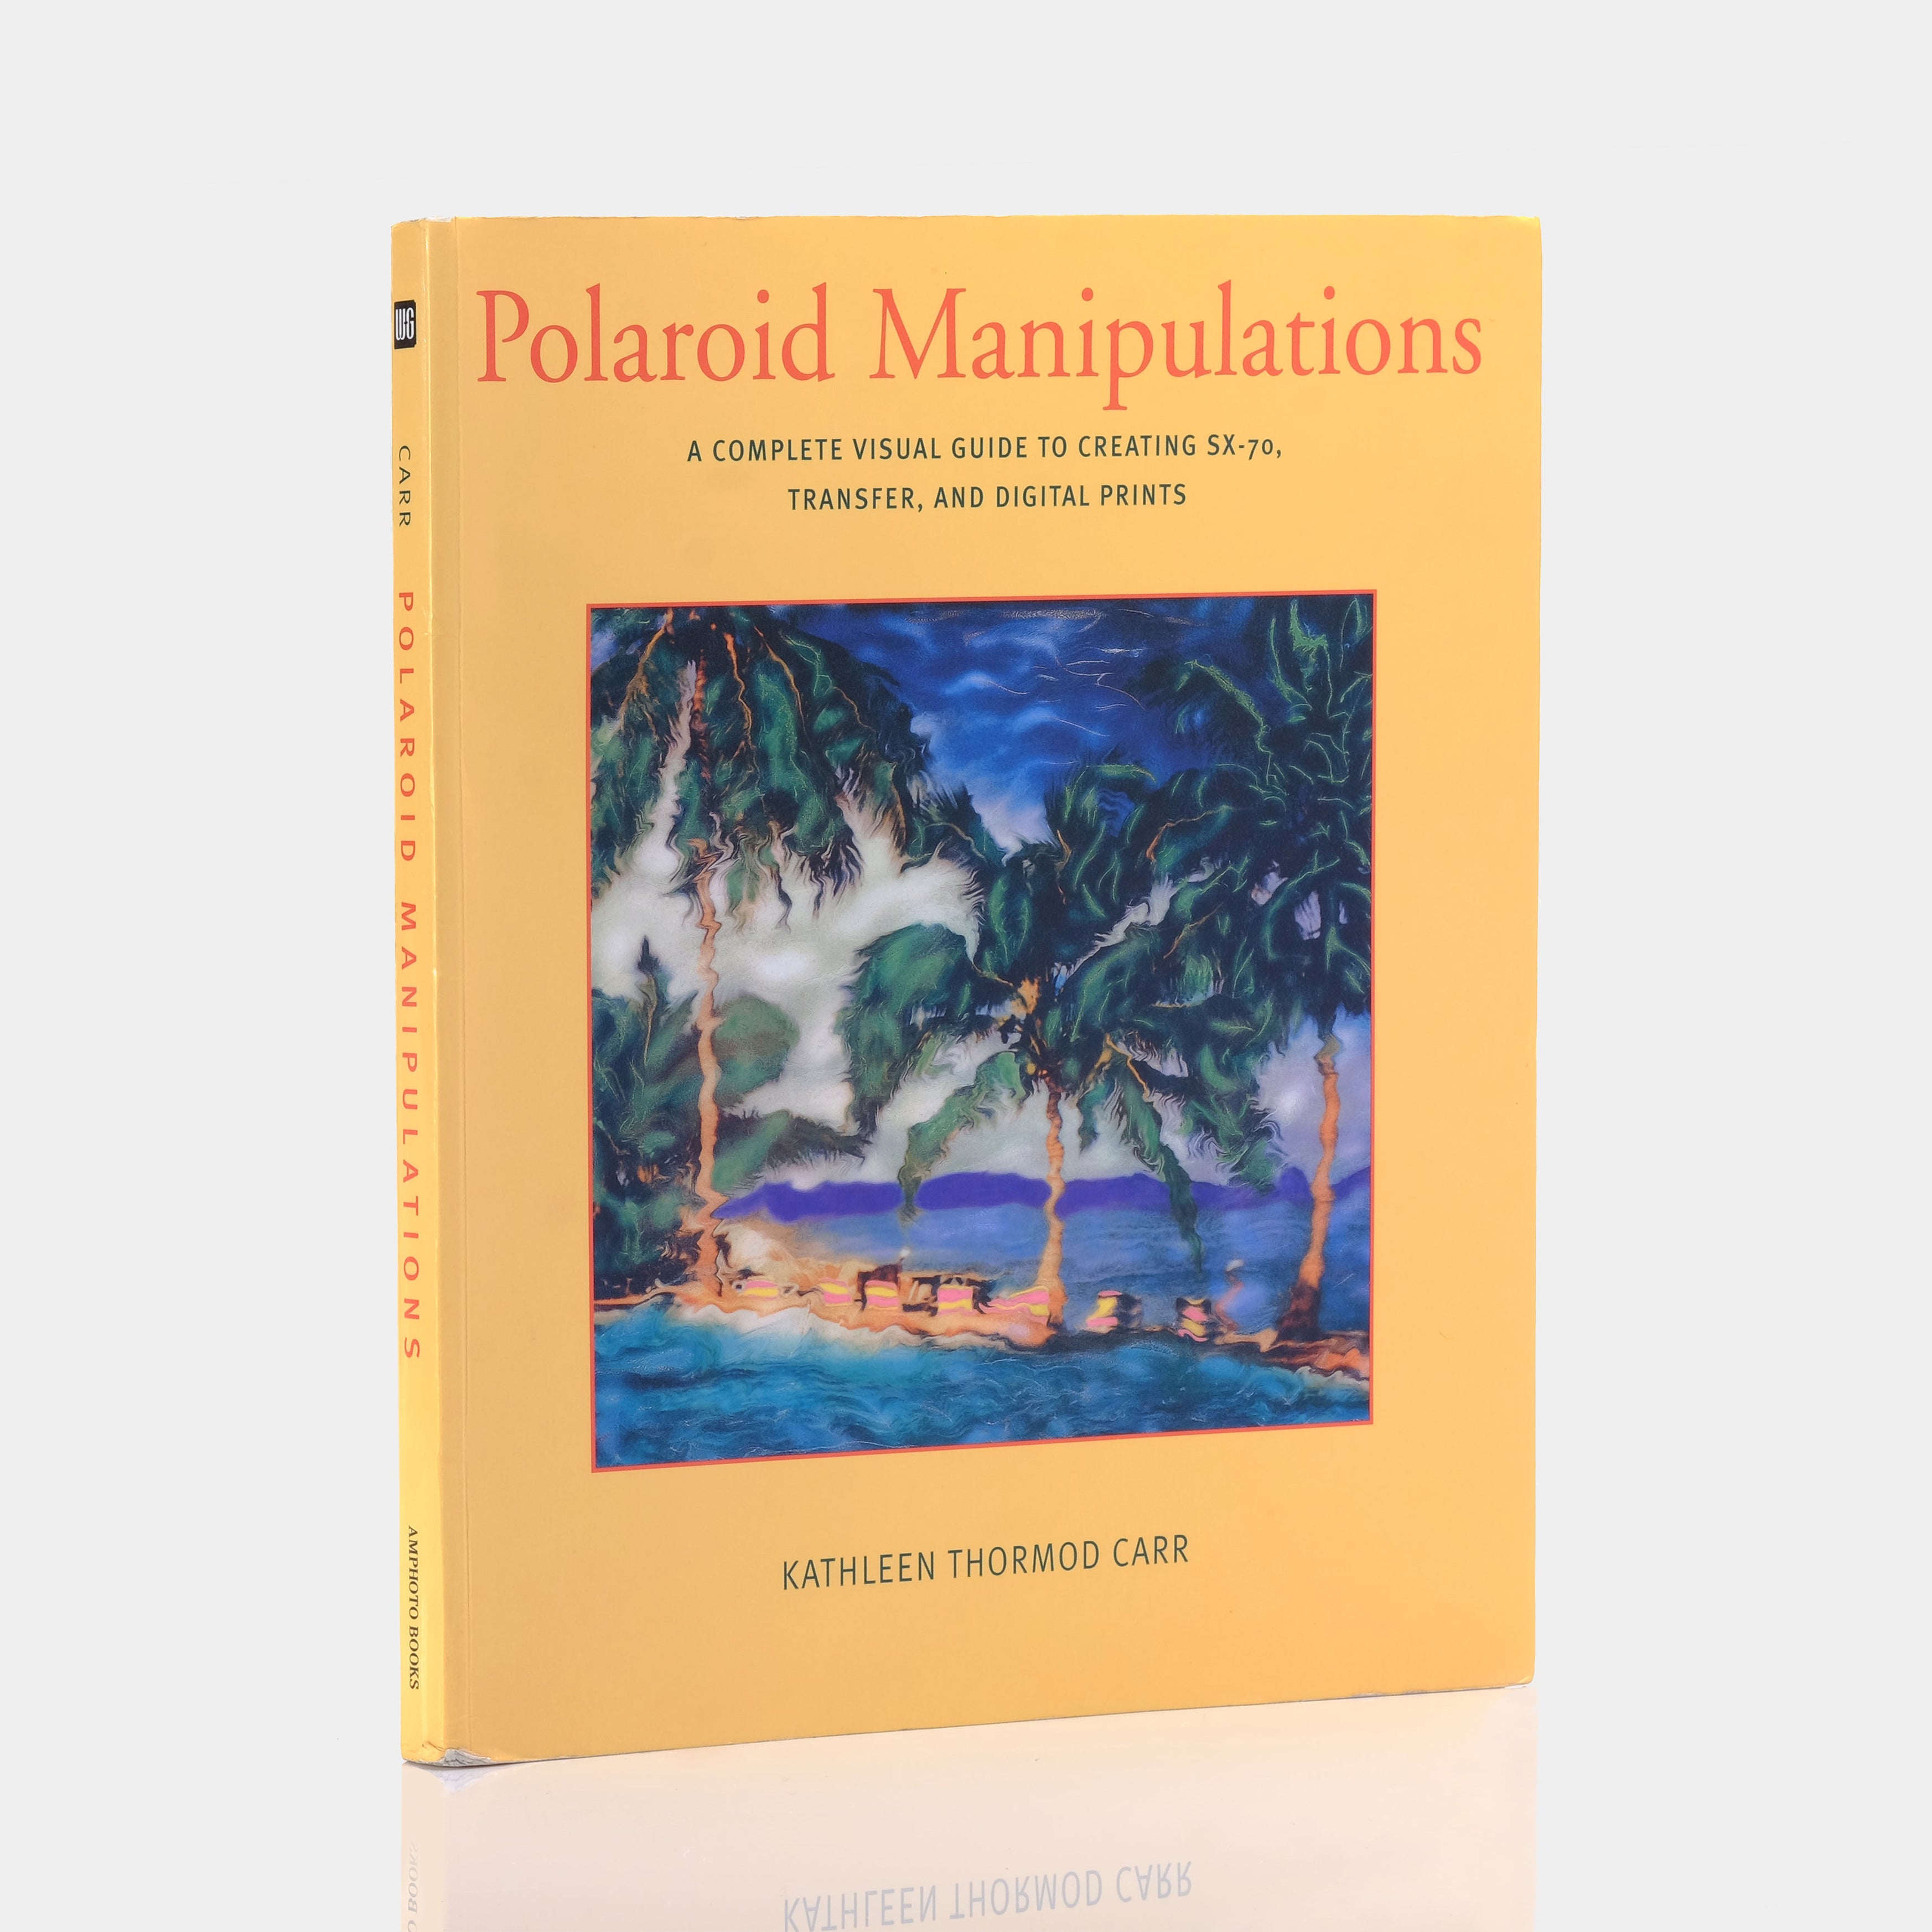 Polaroid Manipulations: A Complete Visual Guide to Creating SX-70, Transfer, and Digital Prints by Kathleen Thormod Carr Book